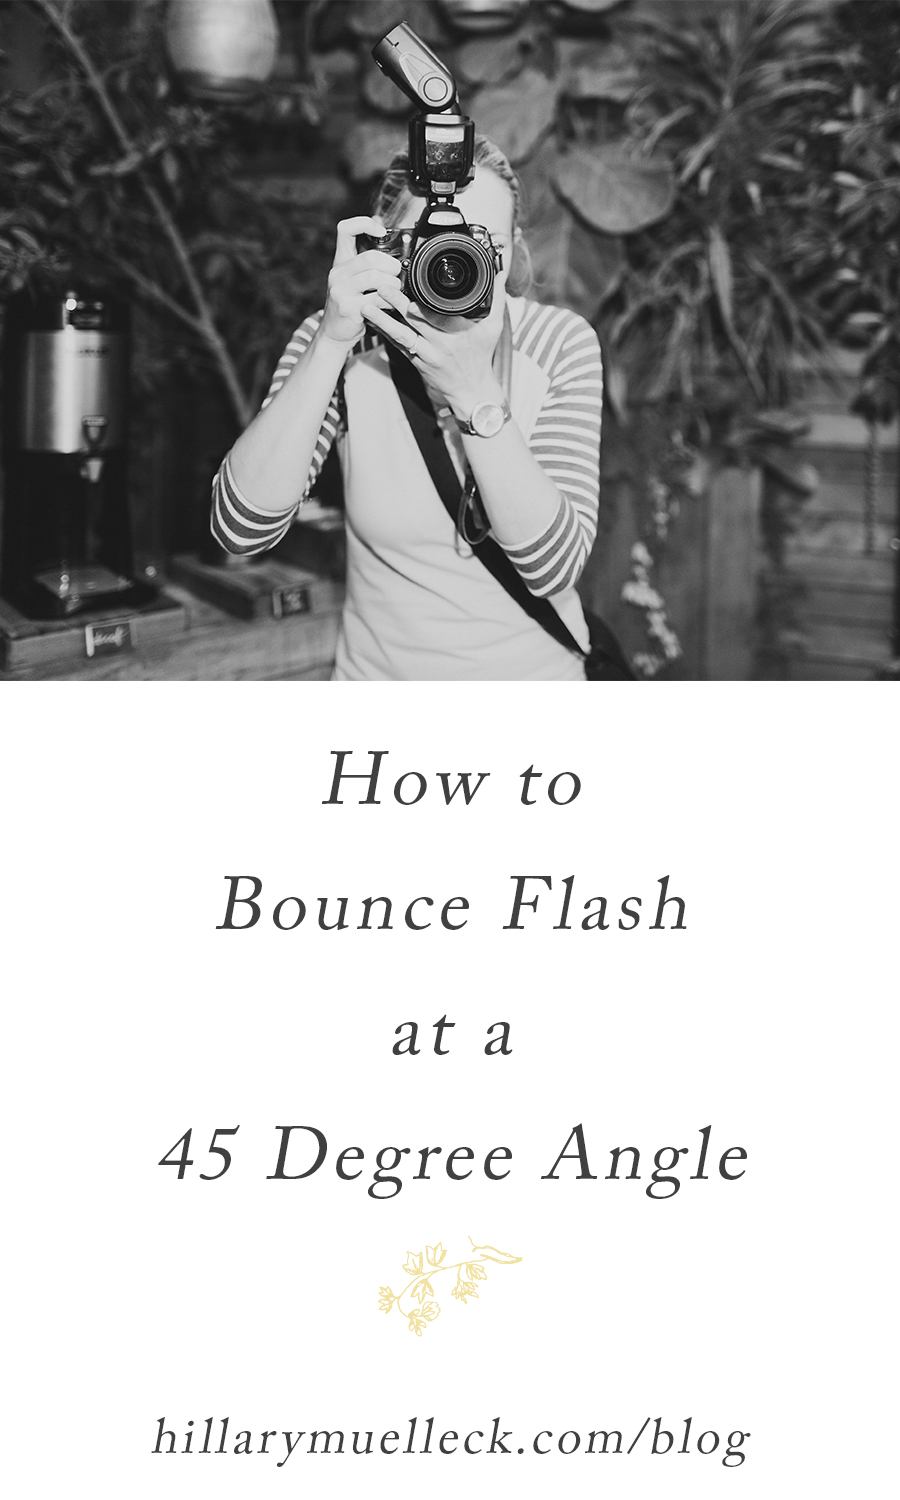 How to Bounce Flash at a 45 Degree Angle